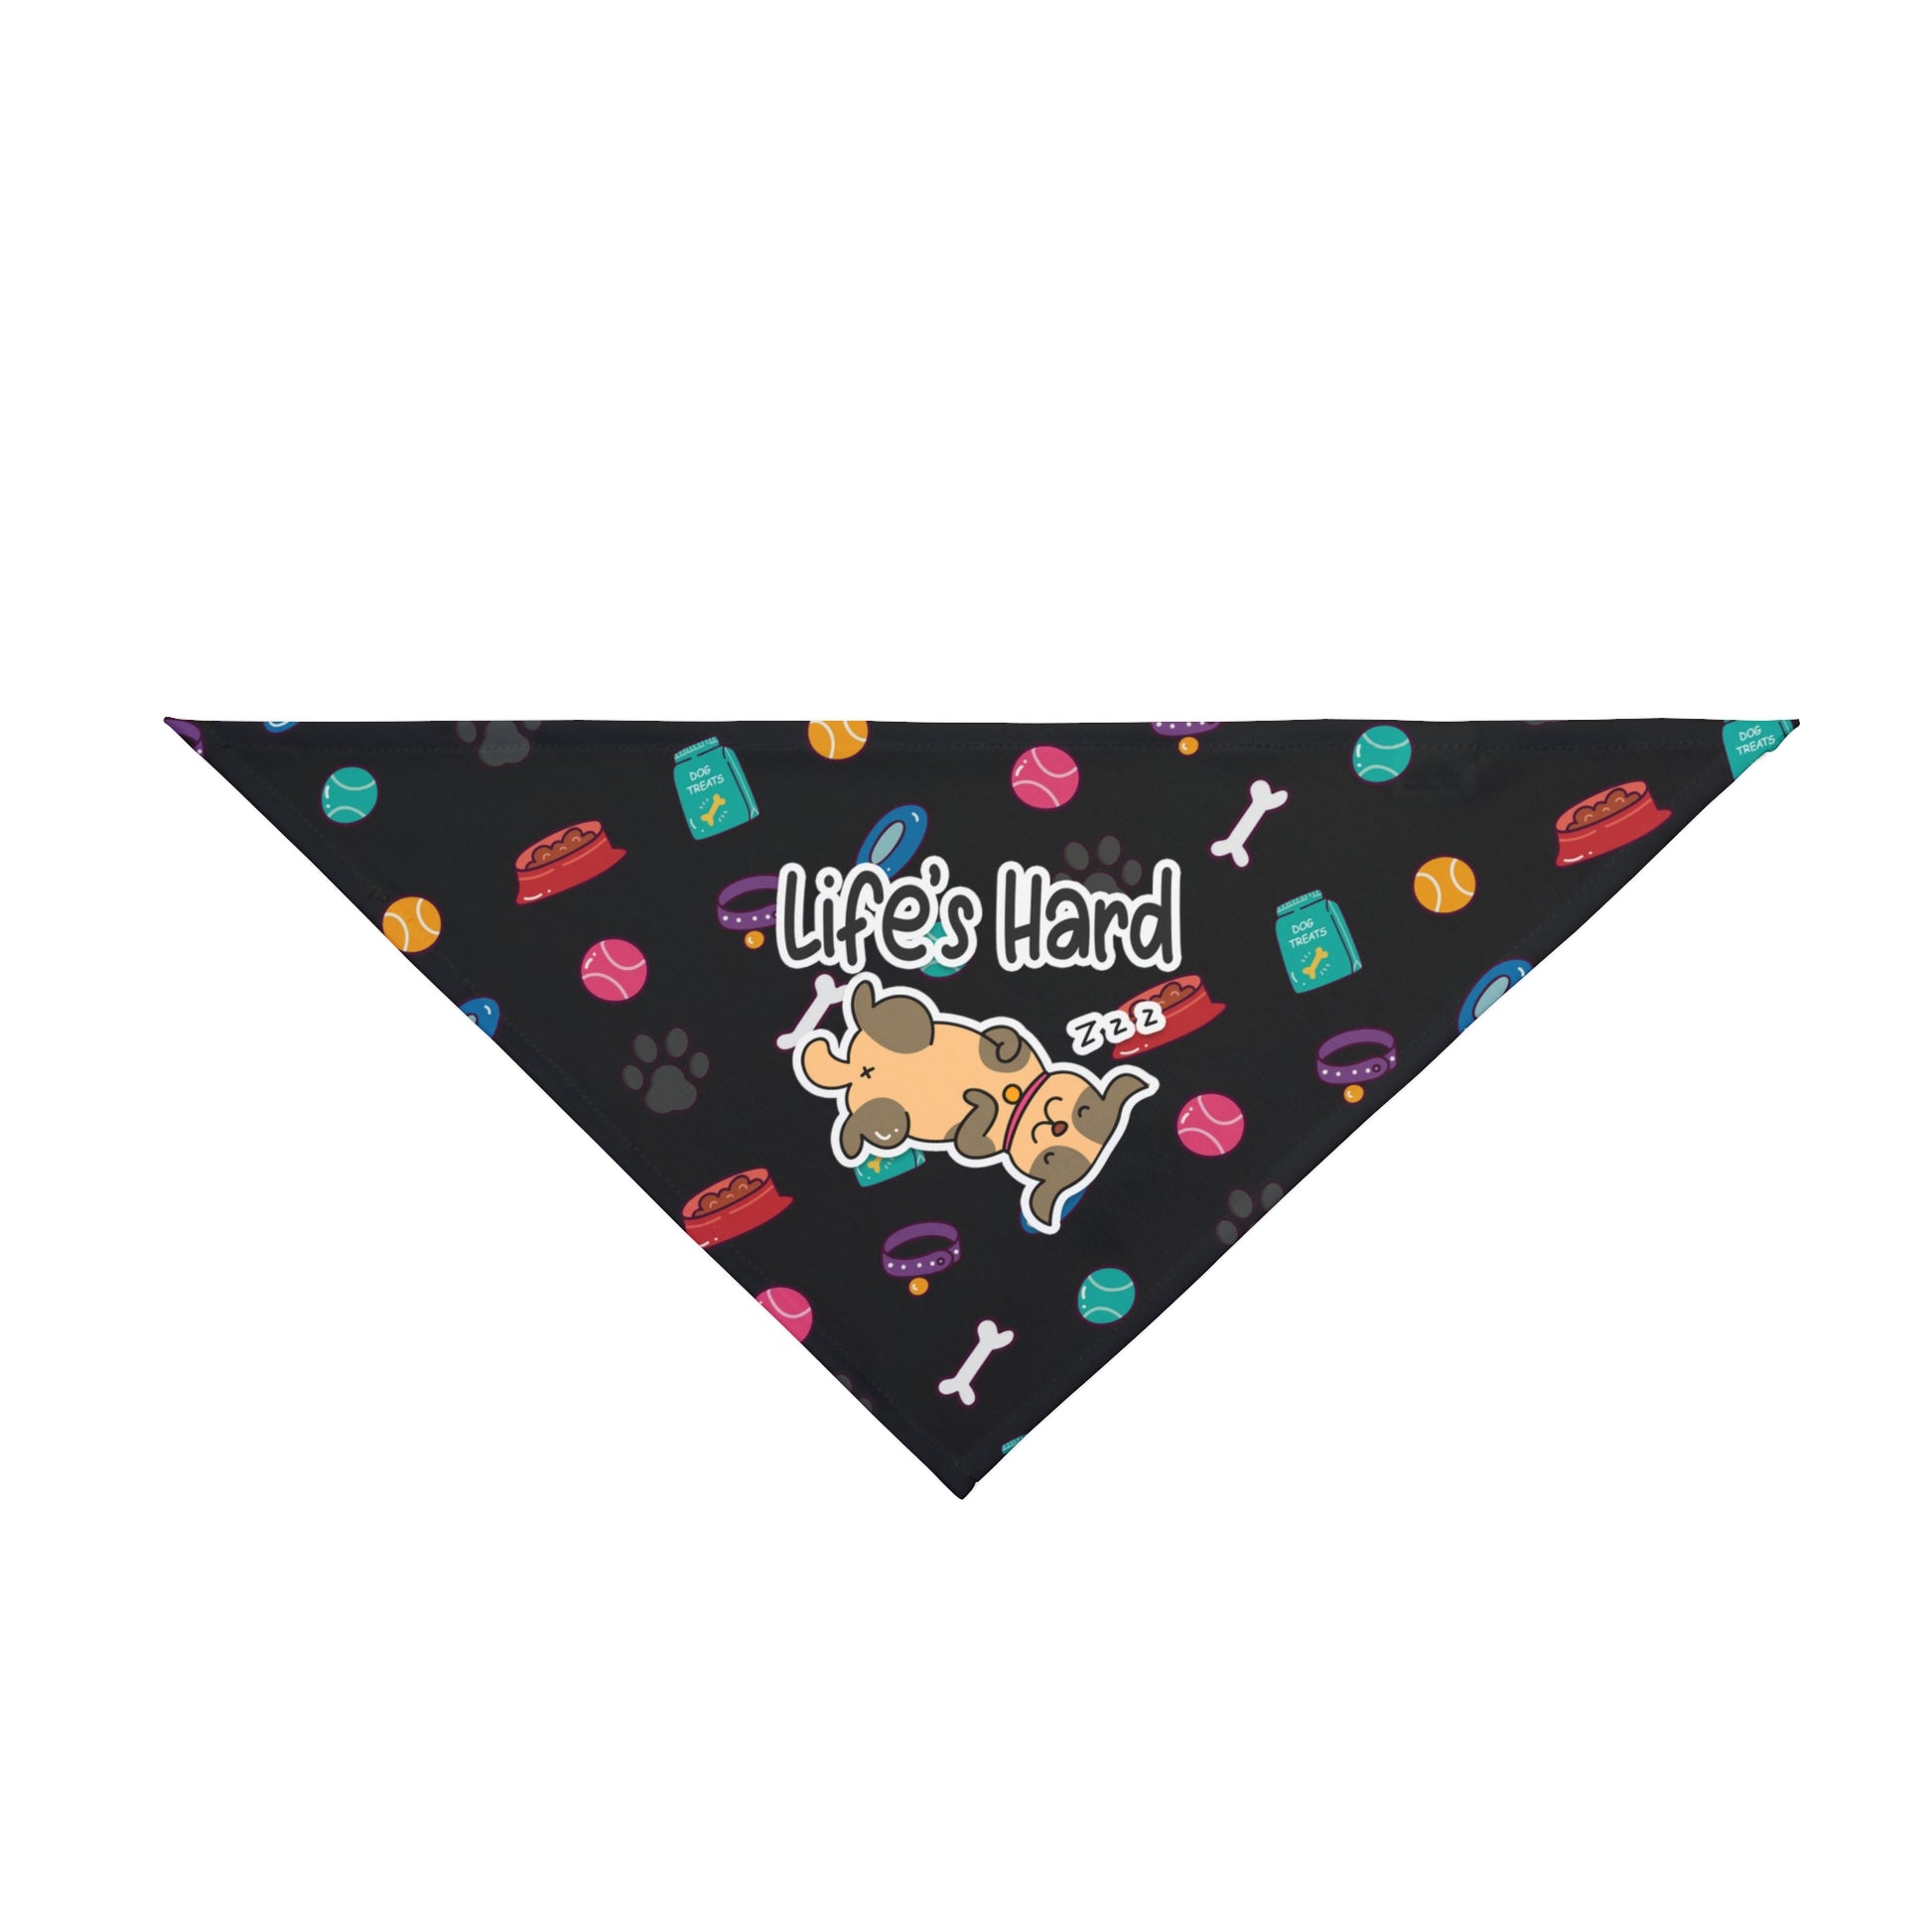 A pet bandana with a beautiful pattern design featuring all things dog love. A smiling dog sleeping below a message that says "Life's hard". Bandana's Color is black